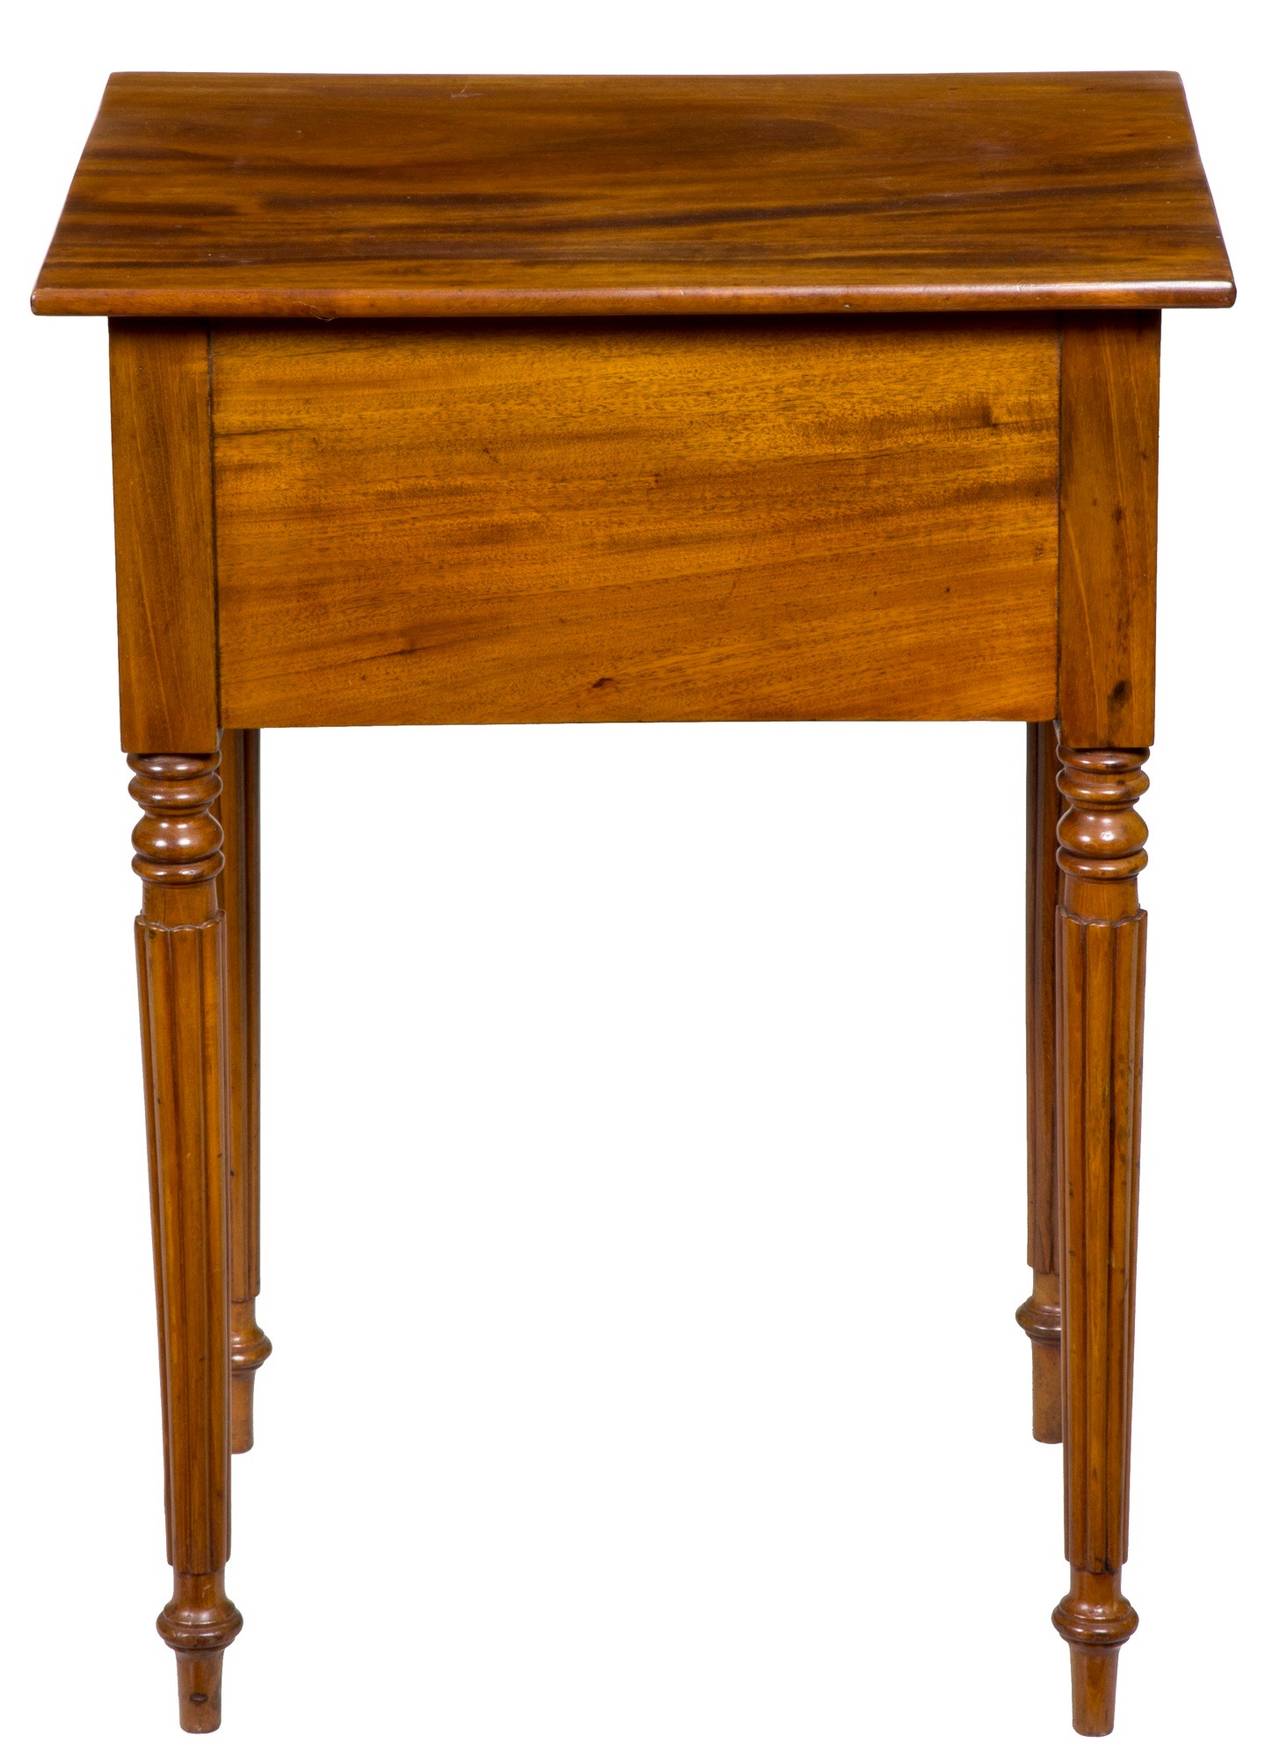 This is a beautiful blond mahogany which almost has a walnut look. The striping of the wood is highlighted by this blond color background, making this table quite light in feel. The tapered reeded legs are done to perfection; note the top of each of